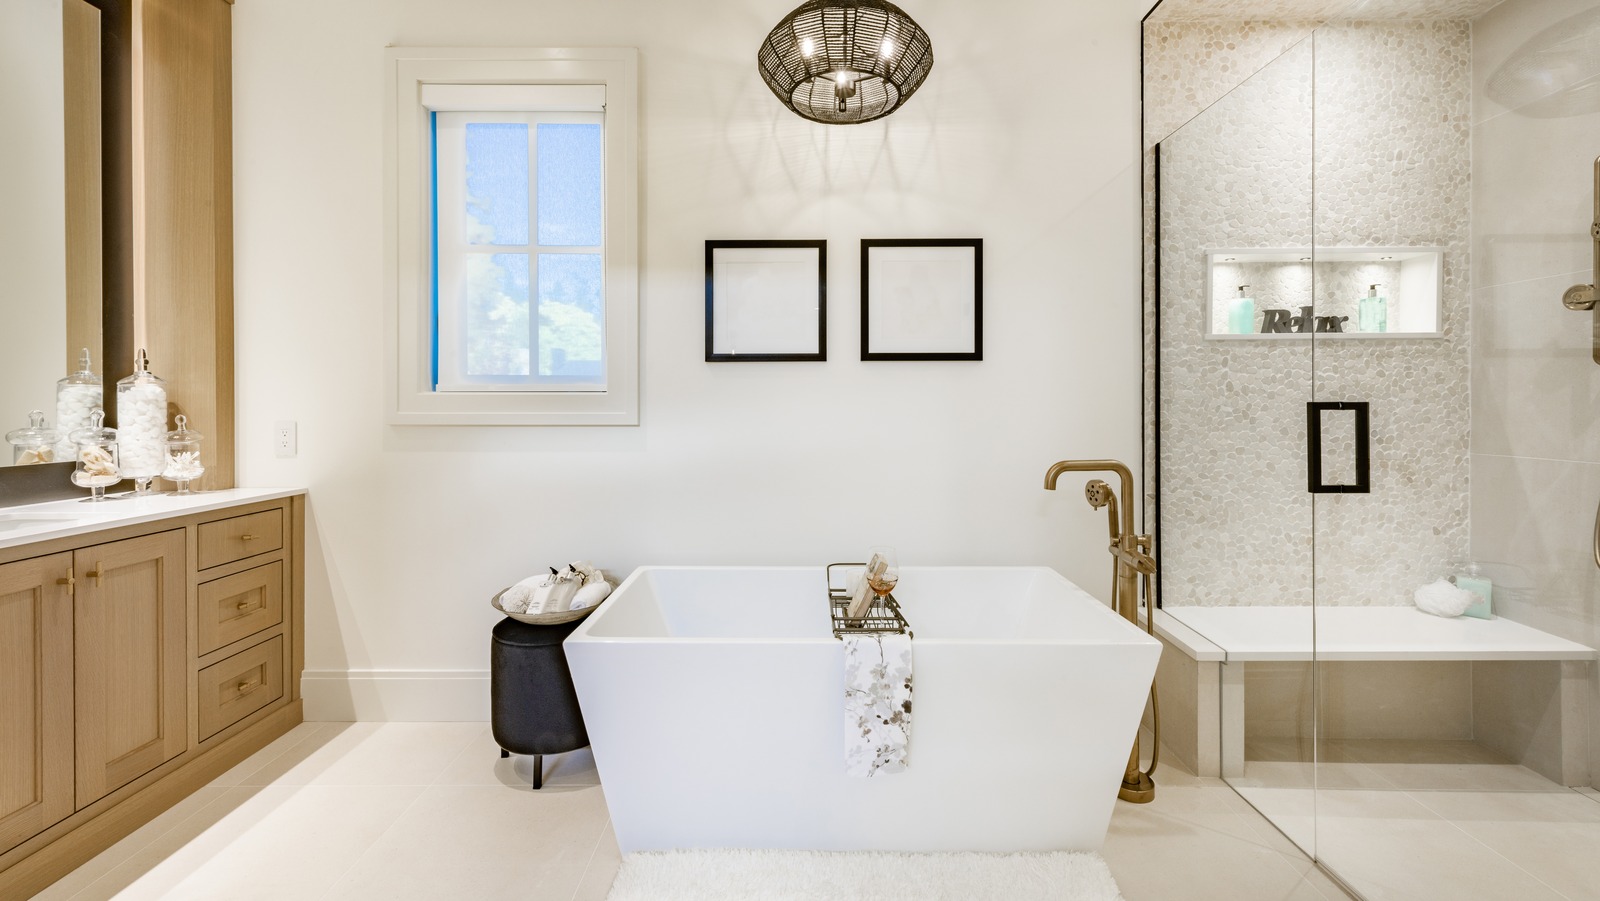 6 Simple Ways To Make Your Bathroom Feel More Private